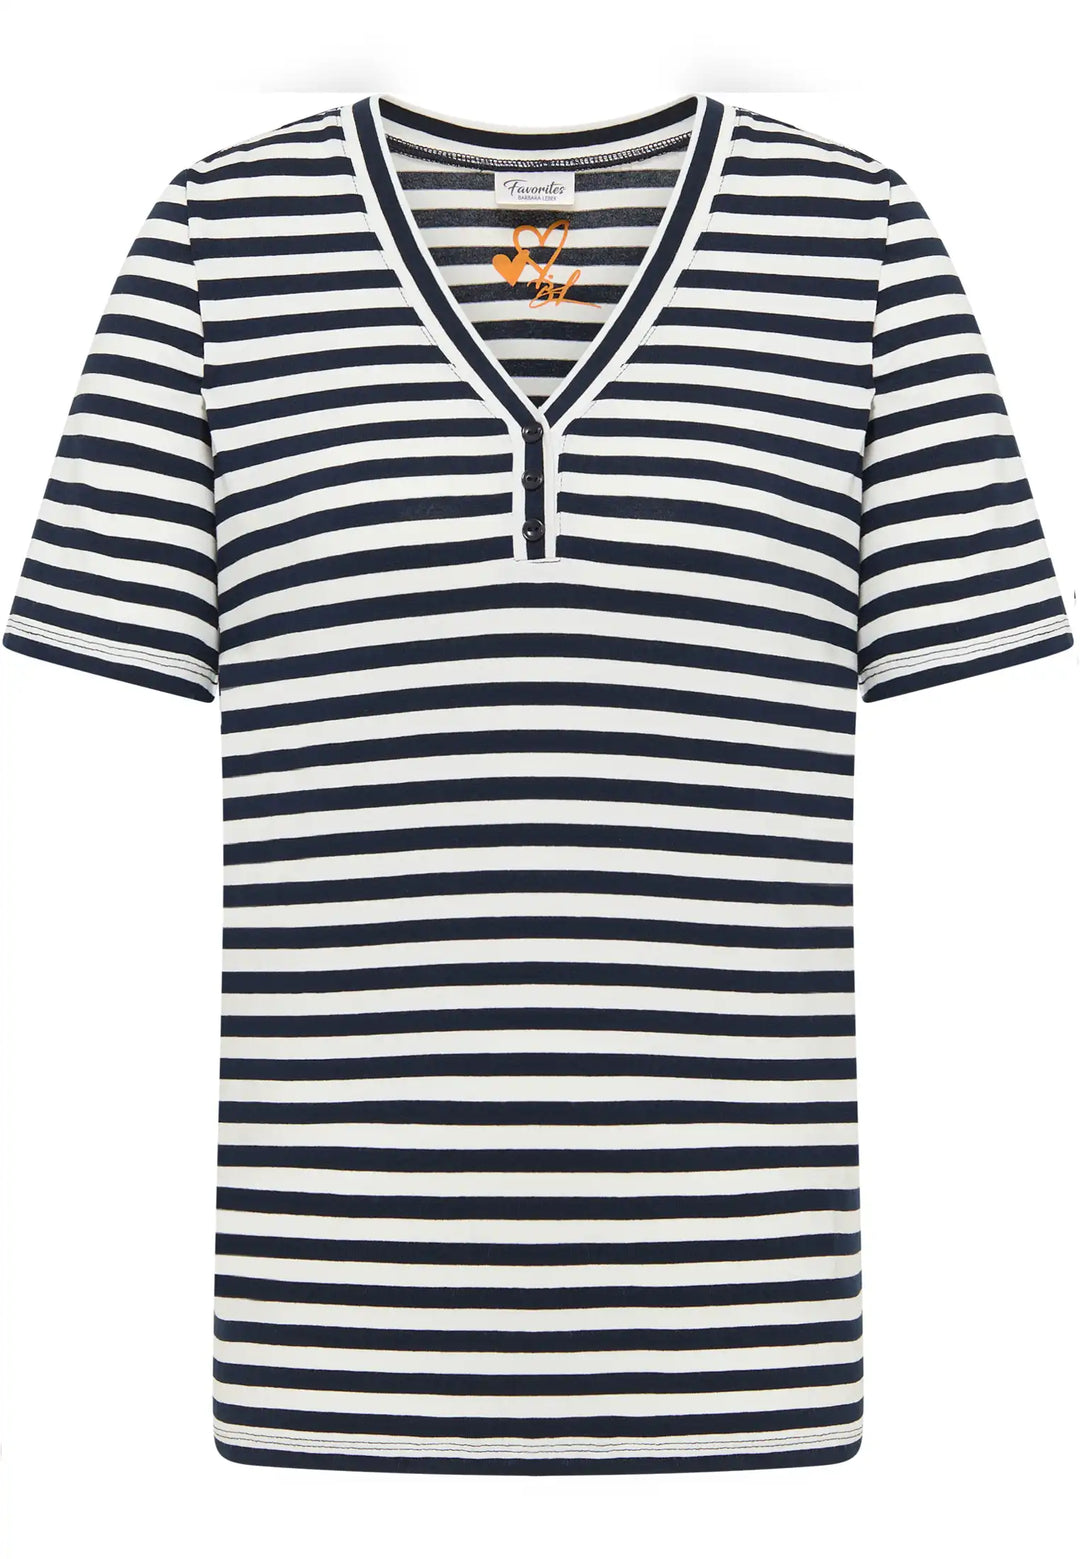 Elegant V-neck striped top with button detail and subtle logo placement for a classic yet modern look, Style 55740042-870